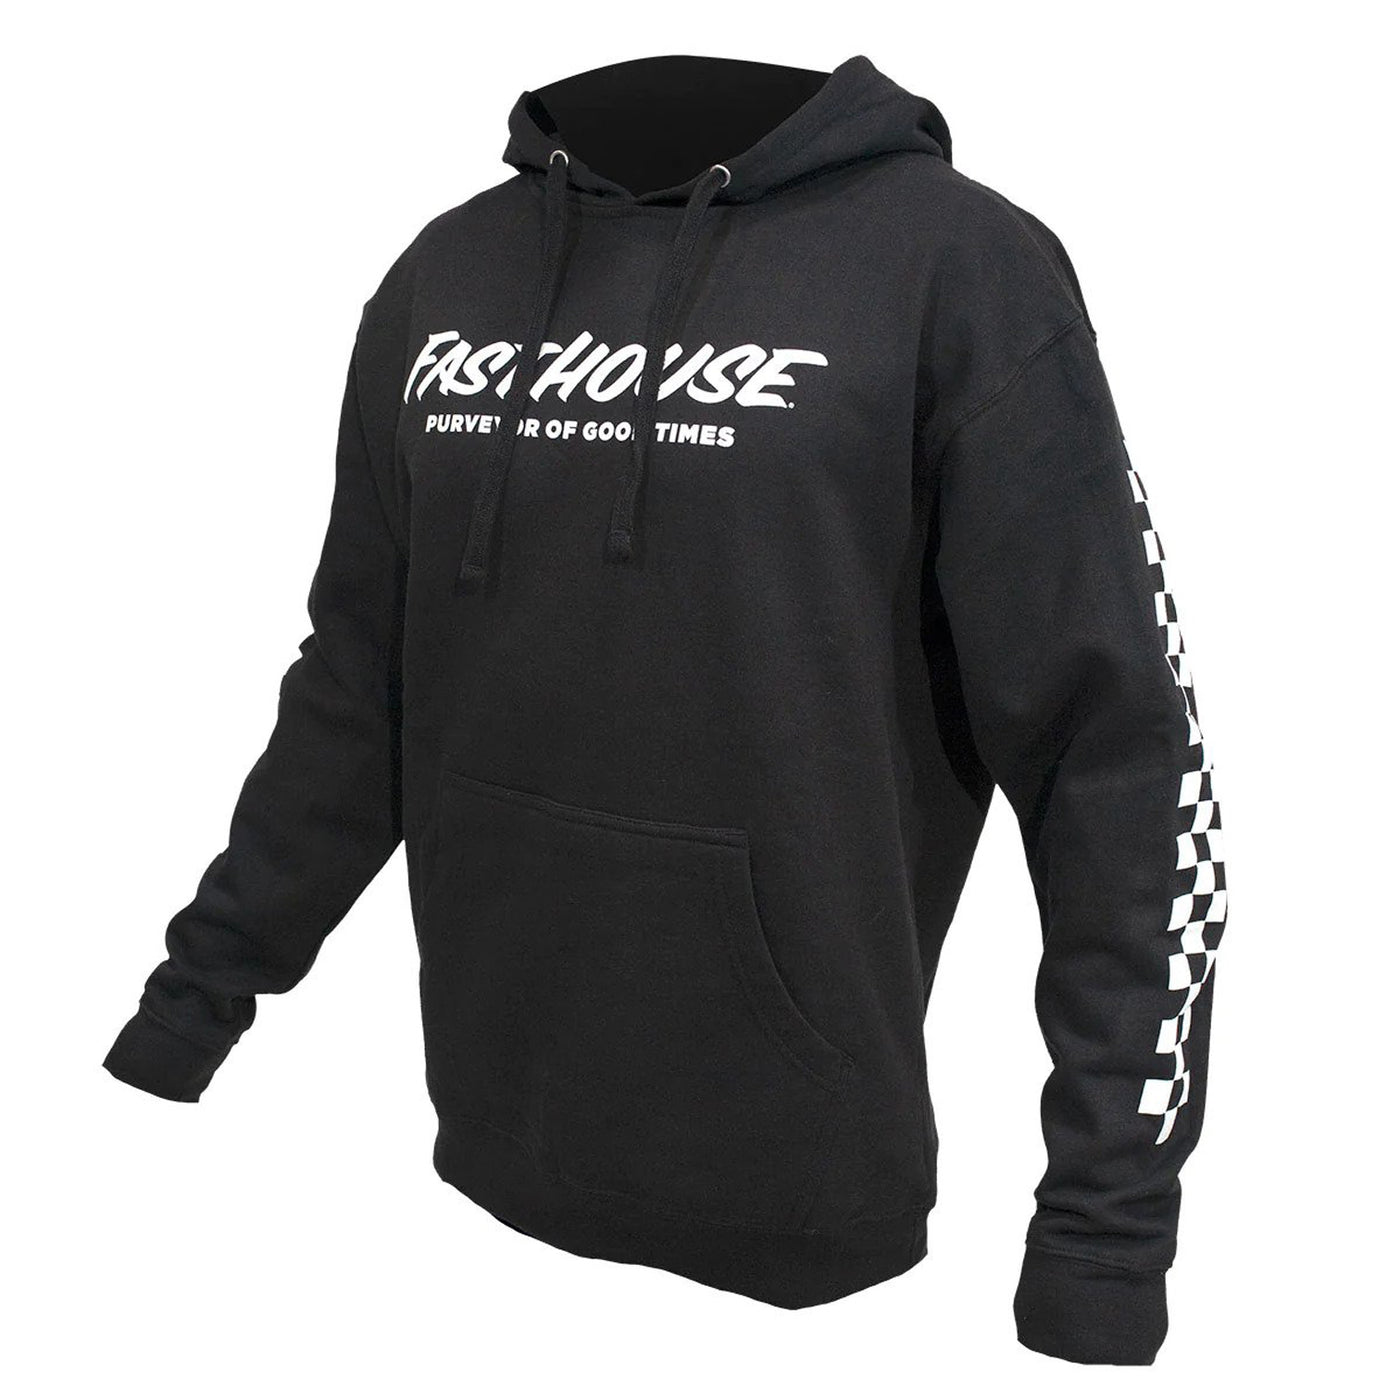 Fasthouse Logo Hooded Pullover